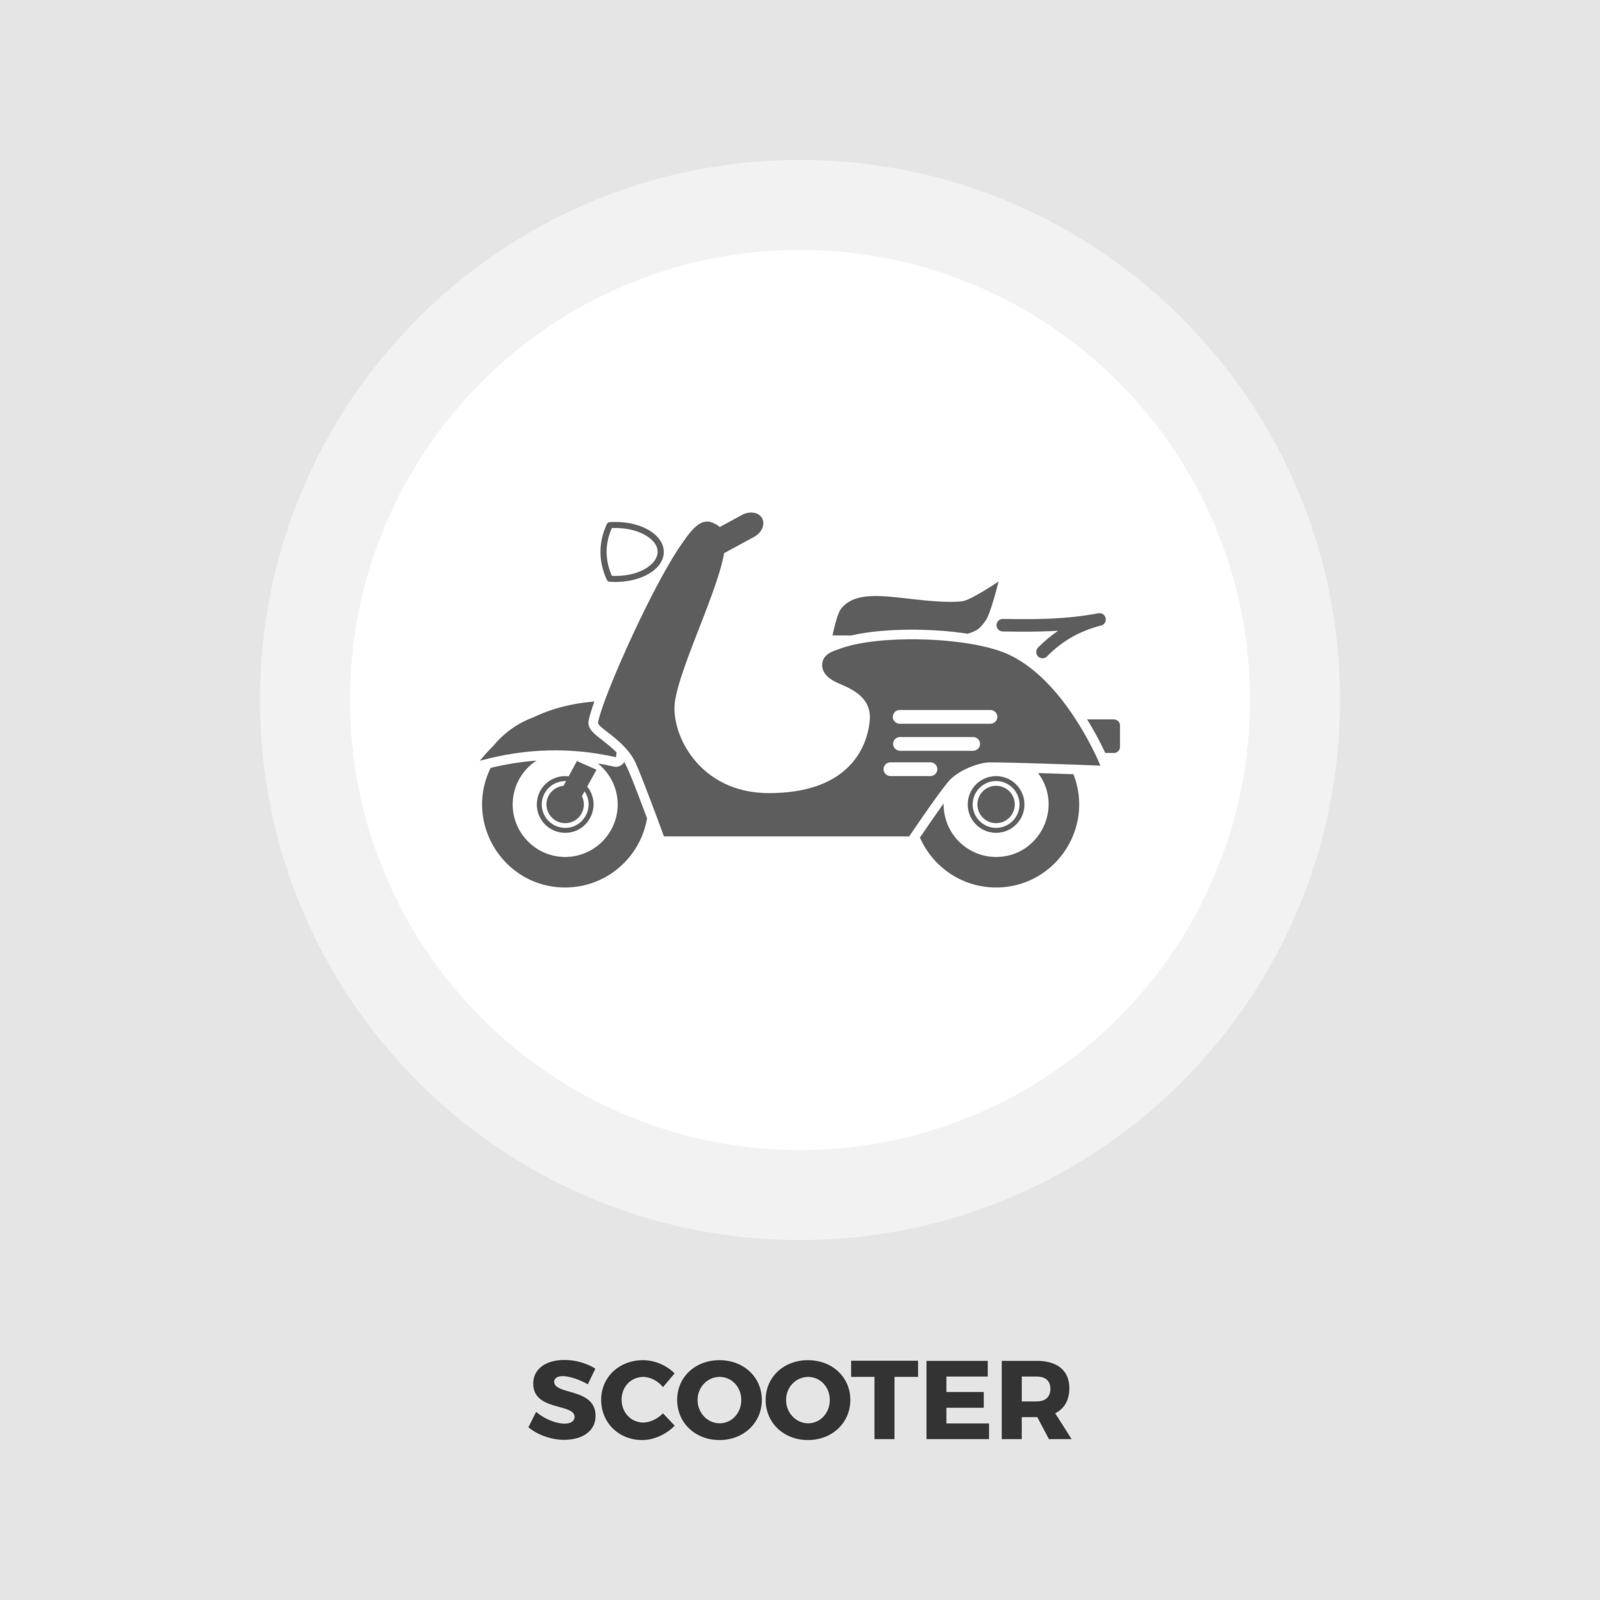 Scooter Icon Vector. Flat icon isolated on the white background. Editable EPS file. Vector illustration.